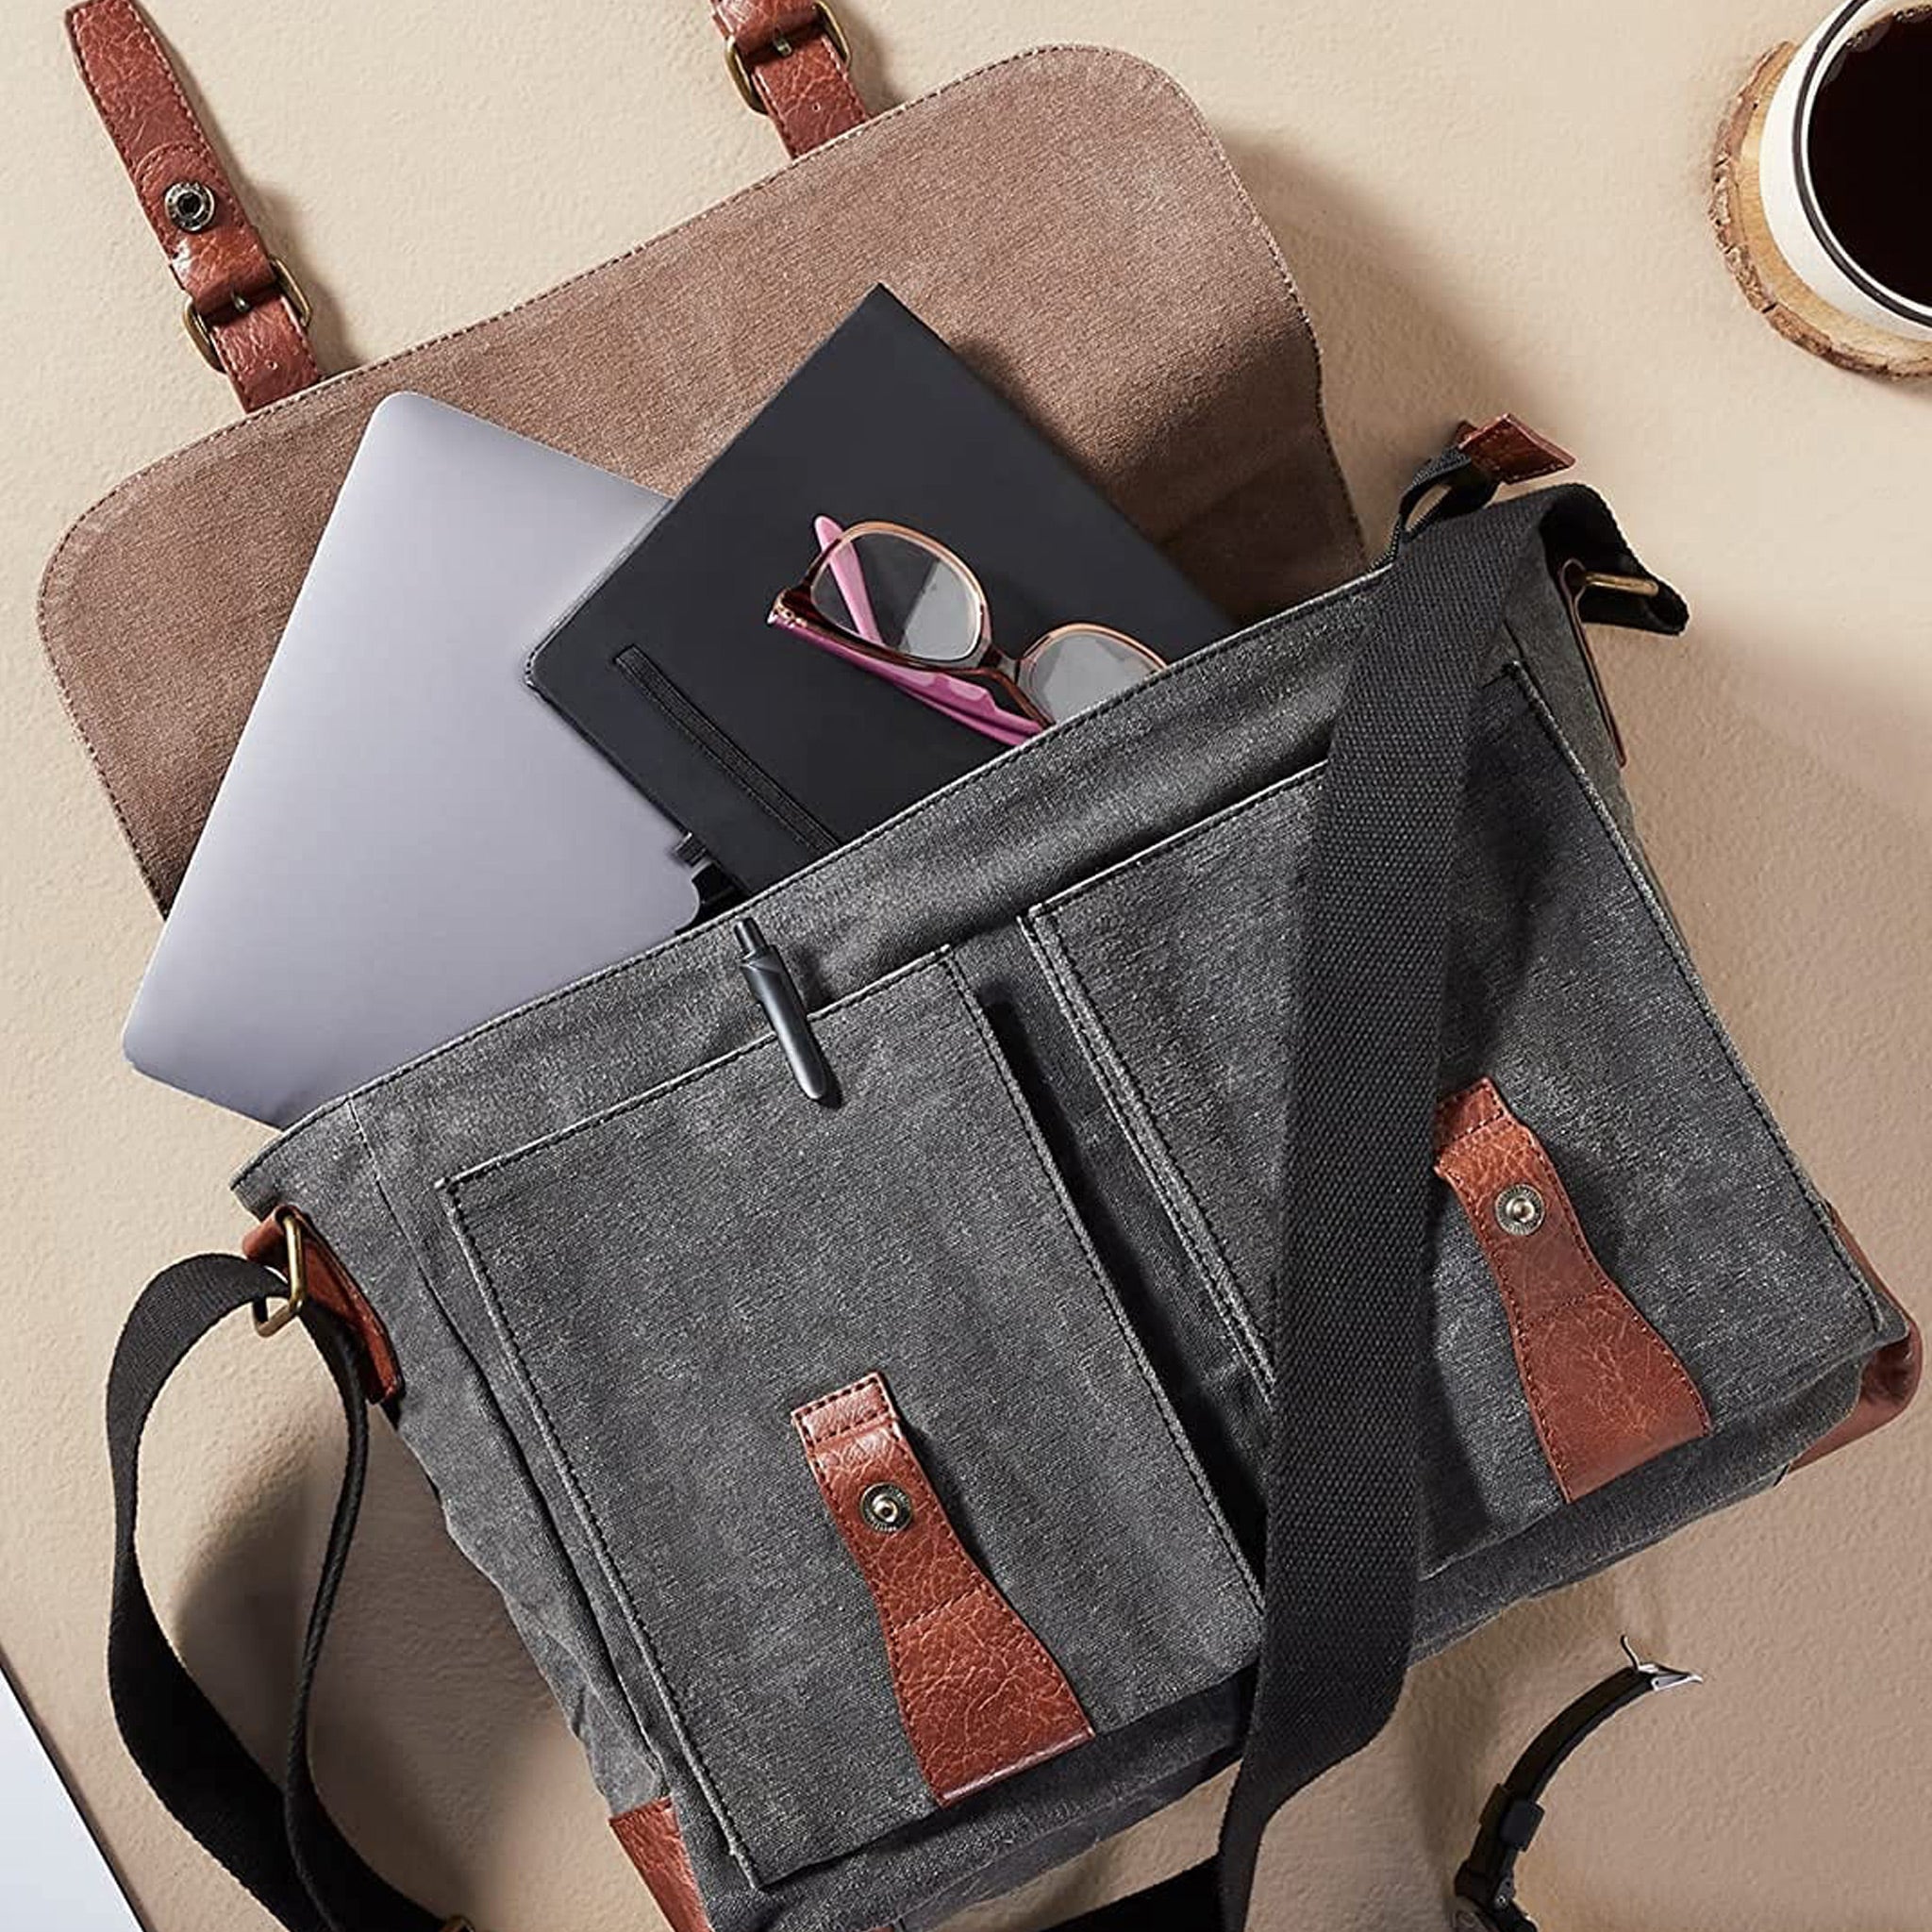 Mona B Upcycled Canvas Messenger Crossbody Laptop Bag for Upto 14" Laptop/Mac Book/Tablet with Stylish Design for Men and Women: Flap